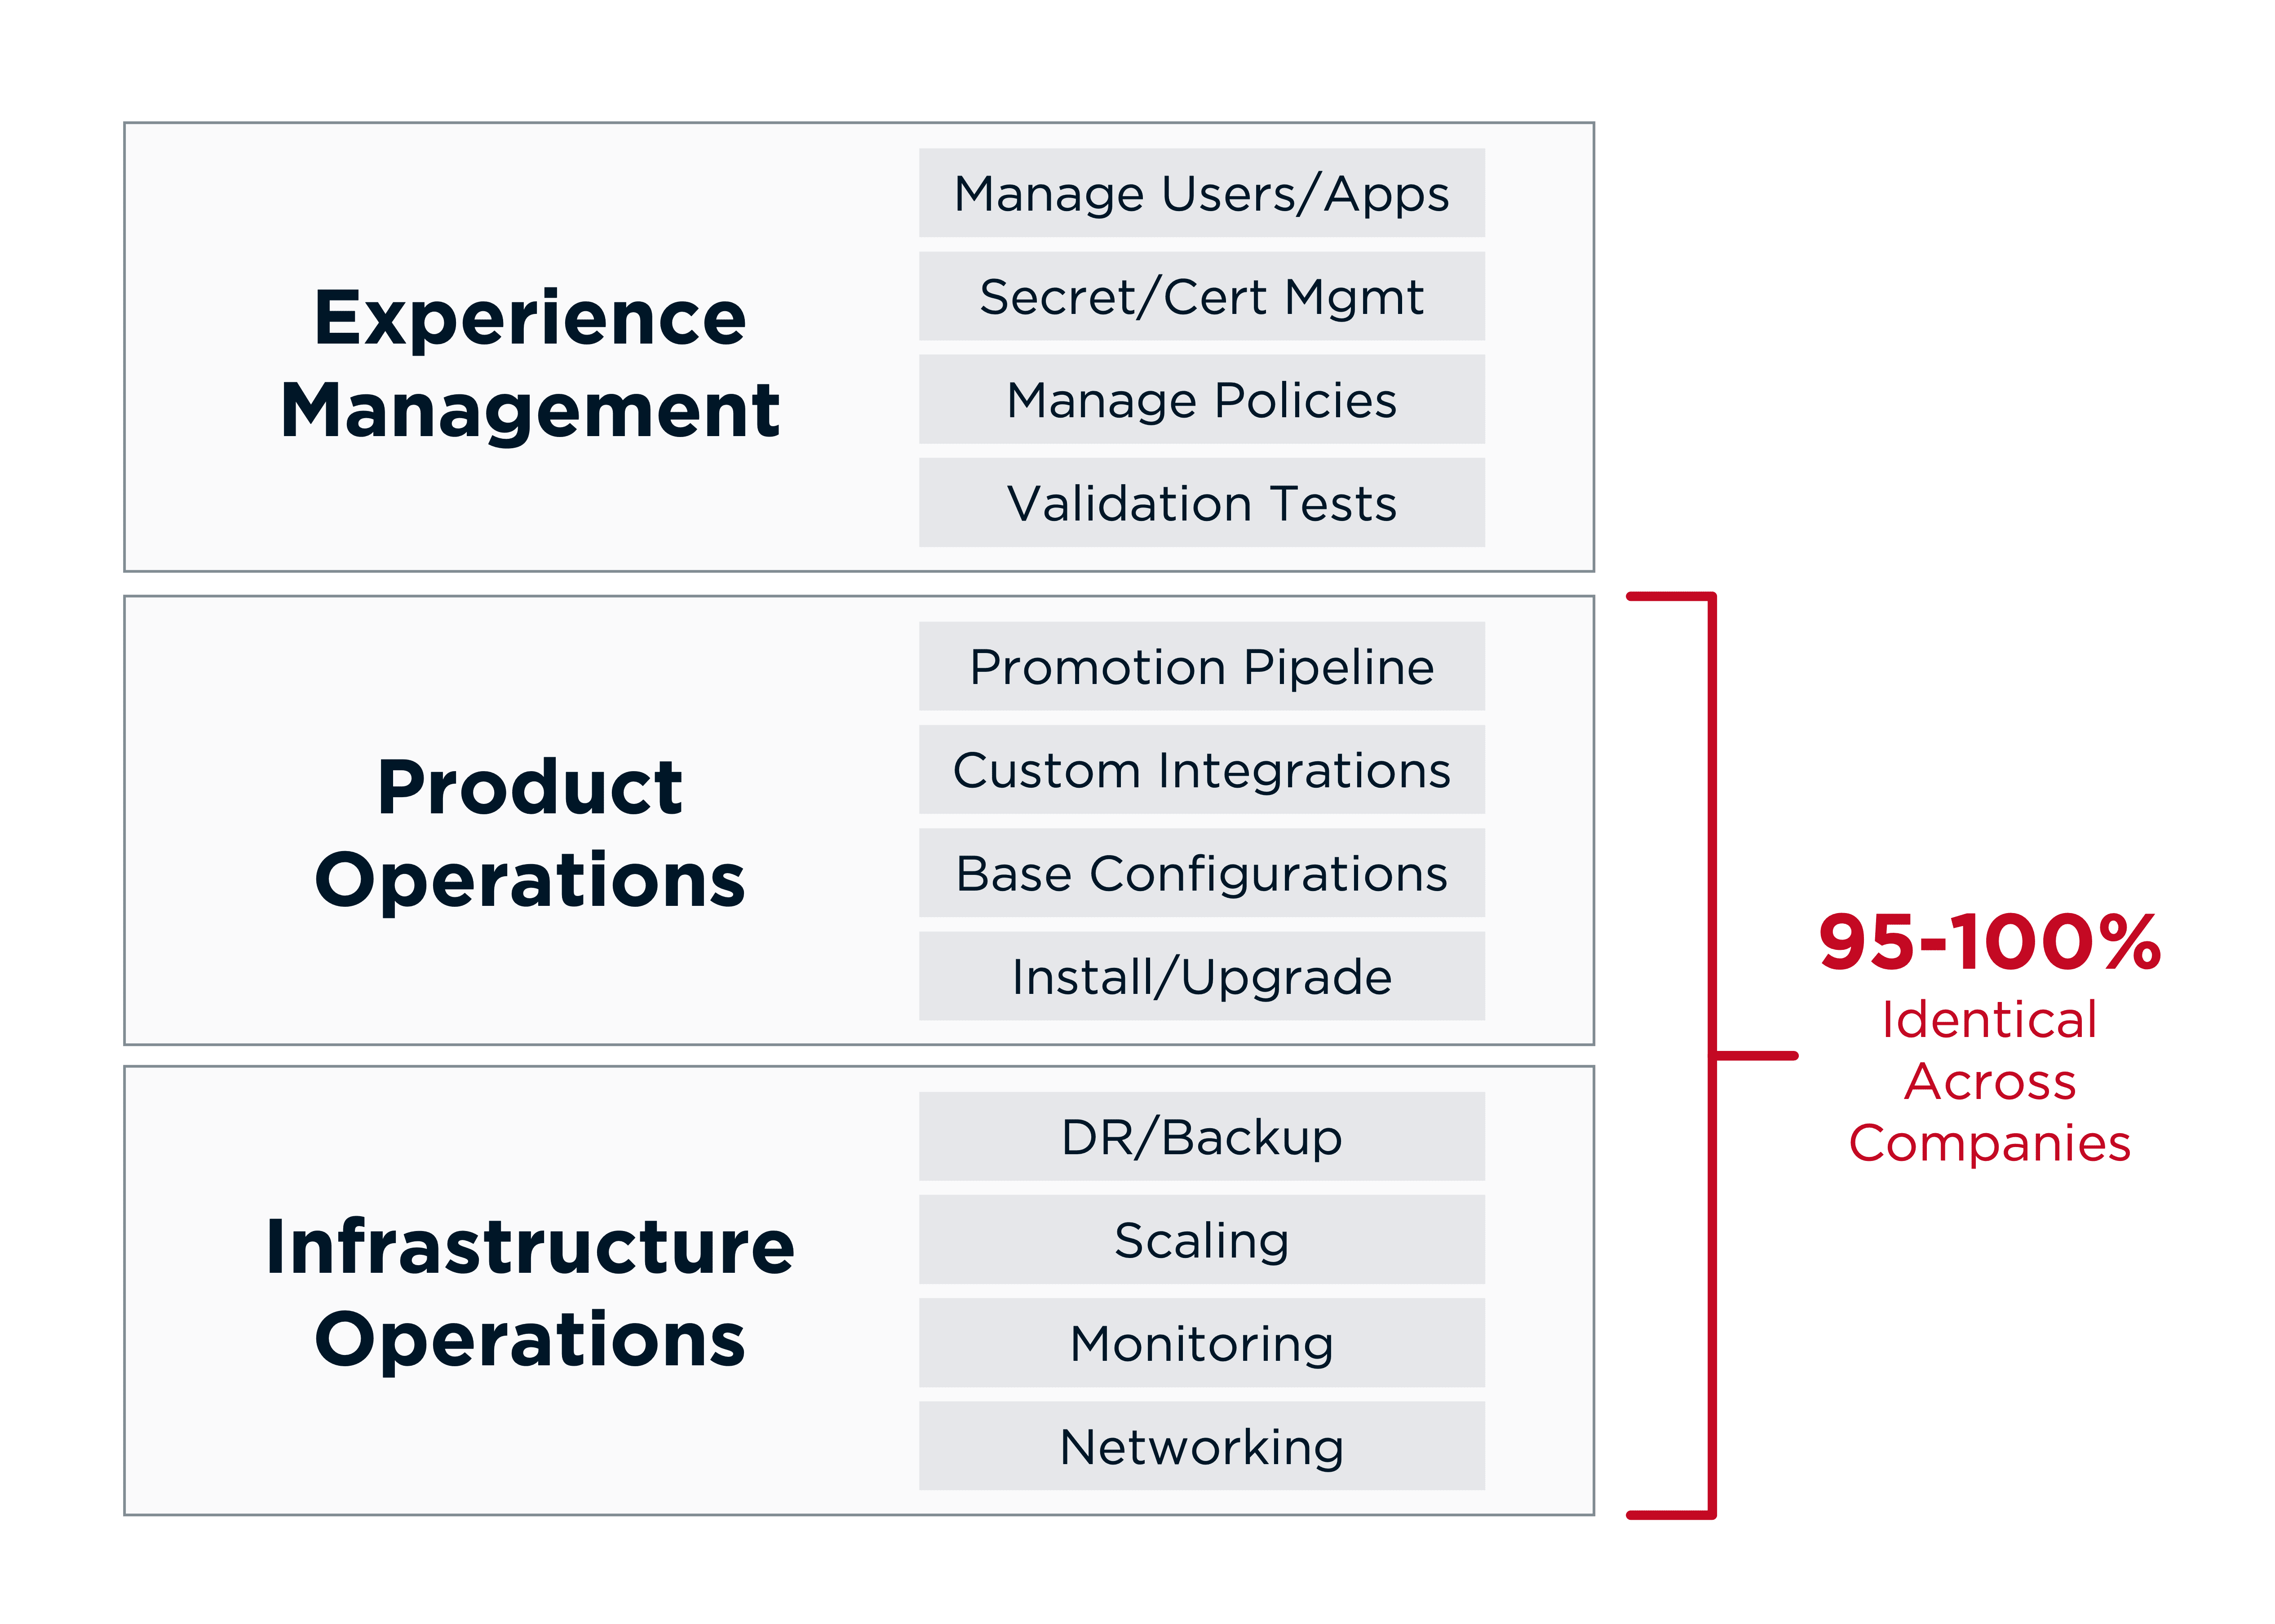 An overview of three general areas of software management responsibility, calling out that product and infrastucture operations are 95-100% identical across companies